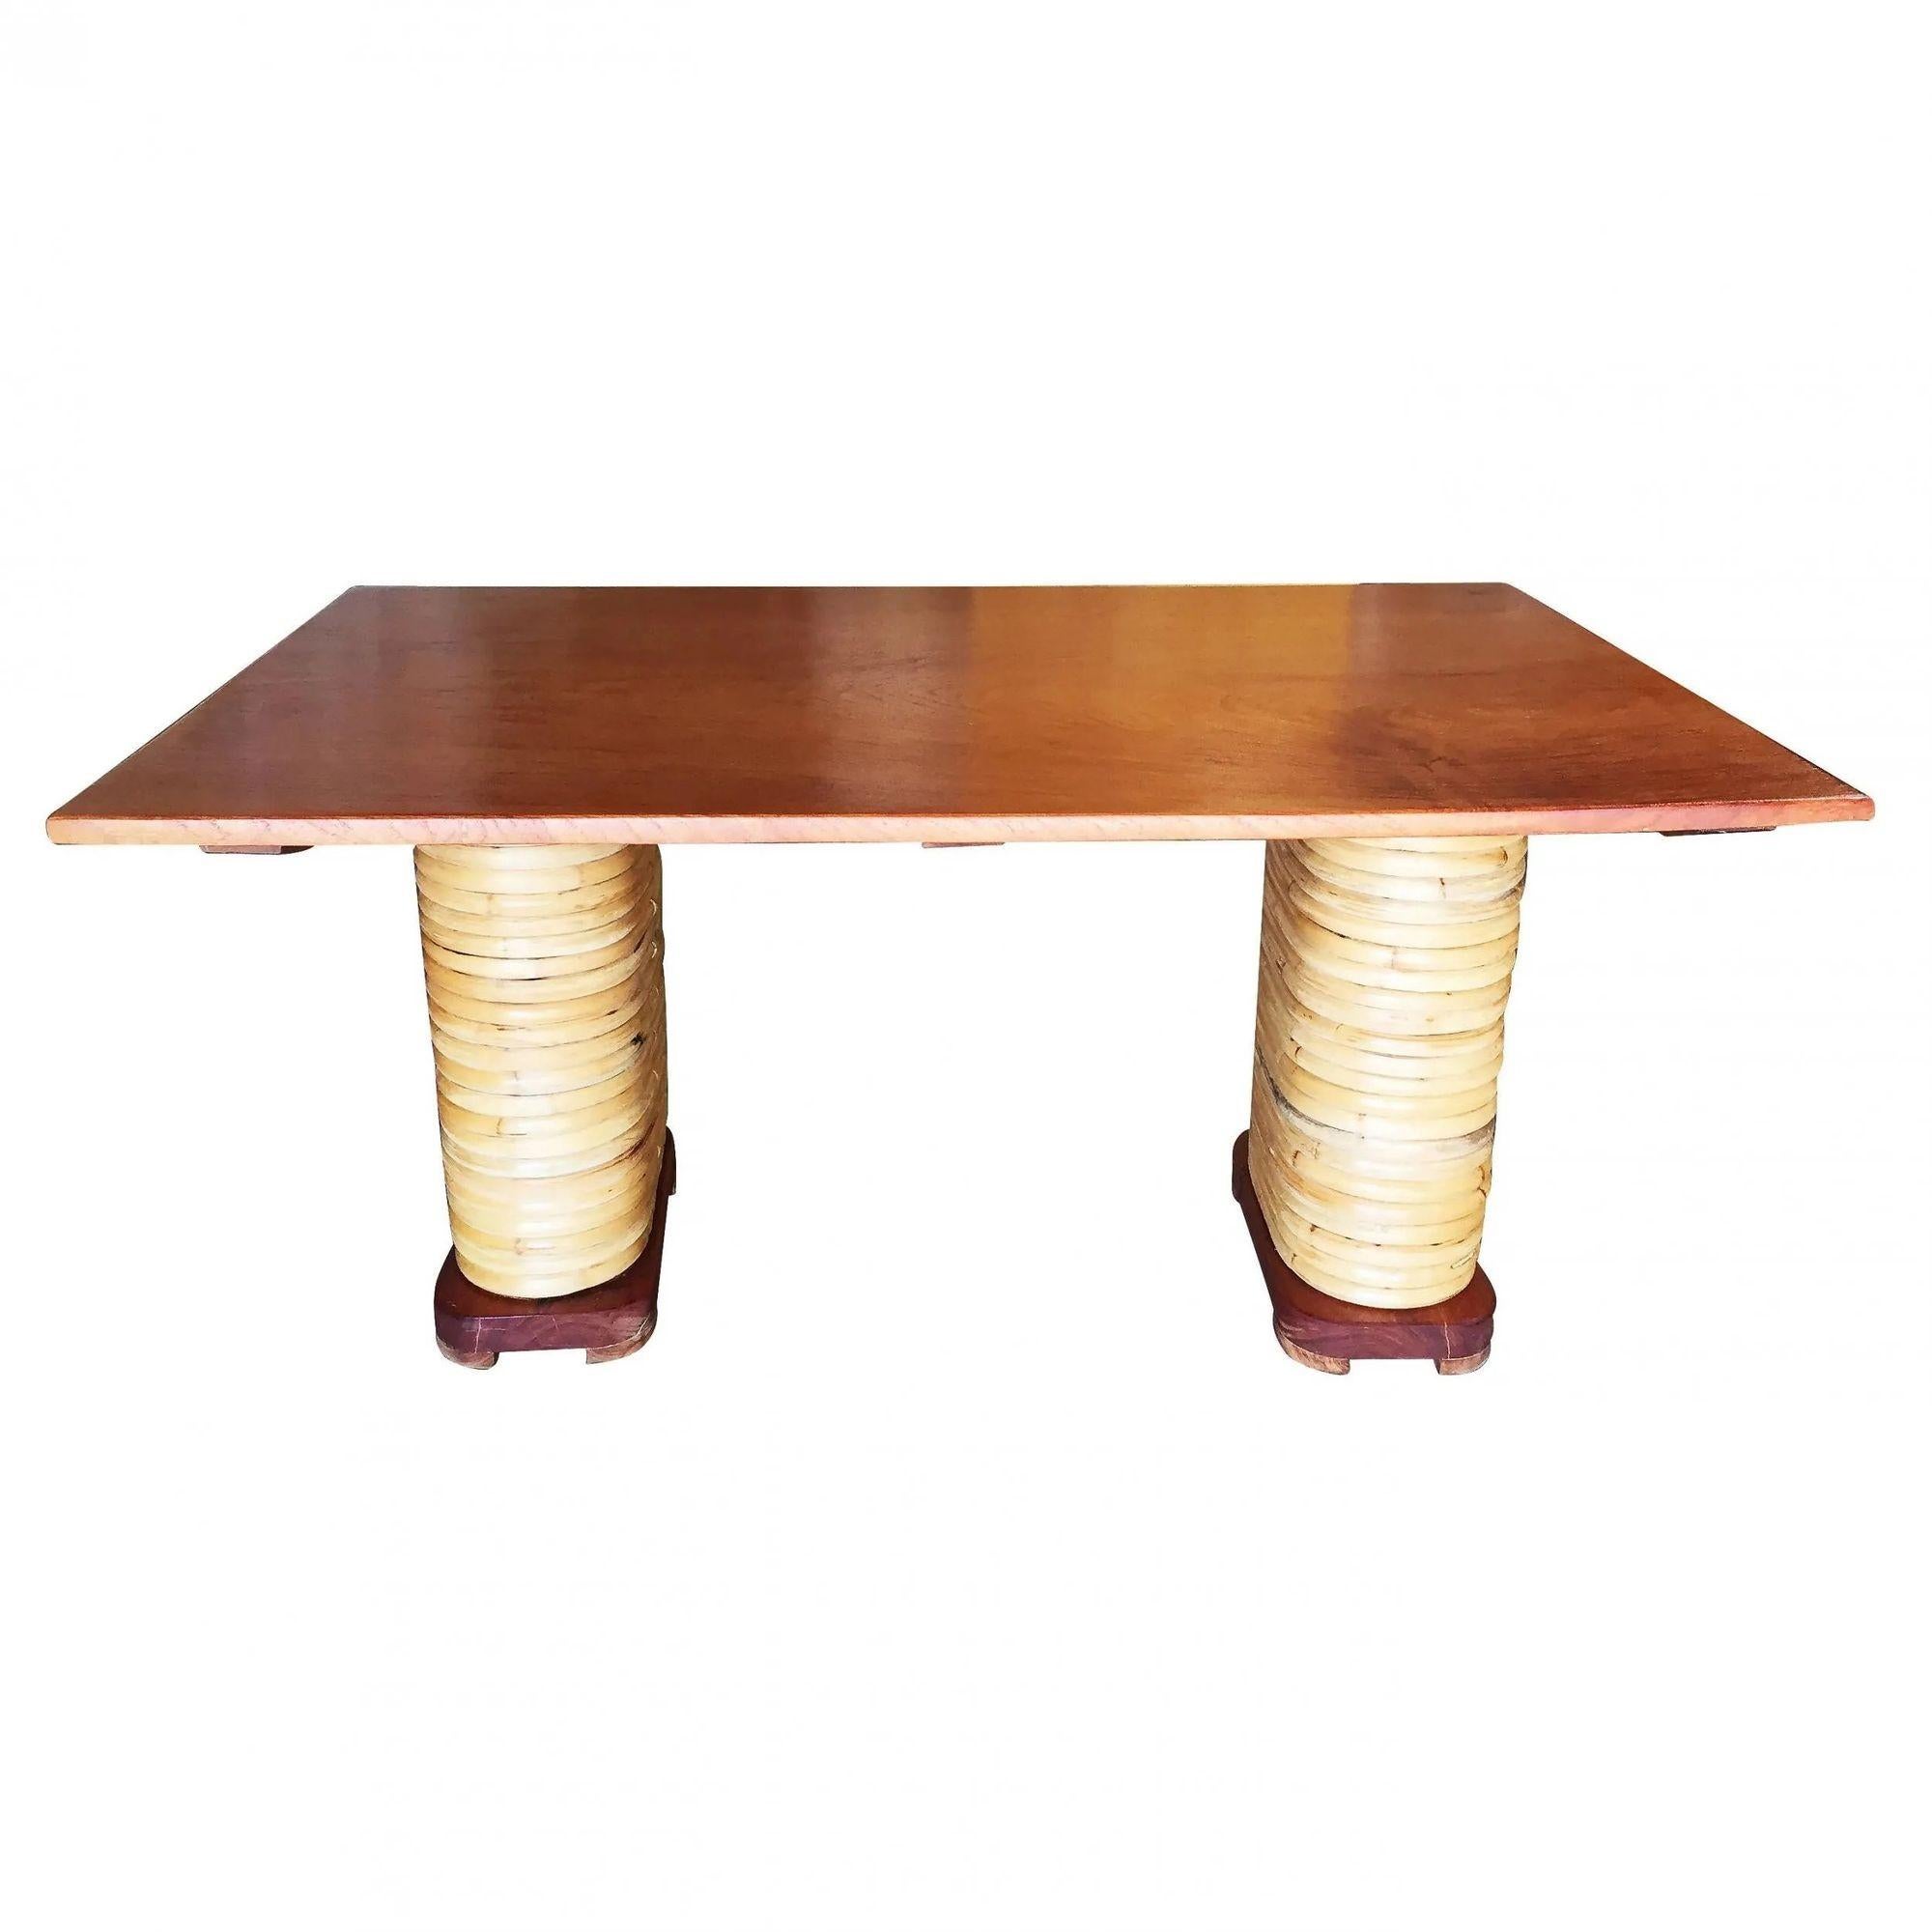 Midcentury six-person stacked rattan double mahogany dining table featuring 2 stacked rattan pedestal bases with solid mahogany feet and a mahogany table top. 
We only purchase and sell only the best and finest rattan furniture made by the best and